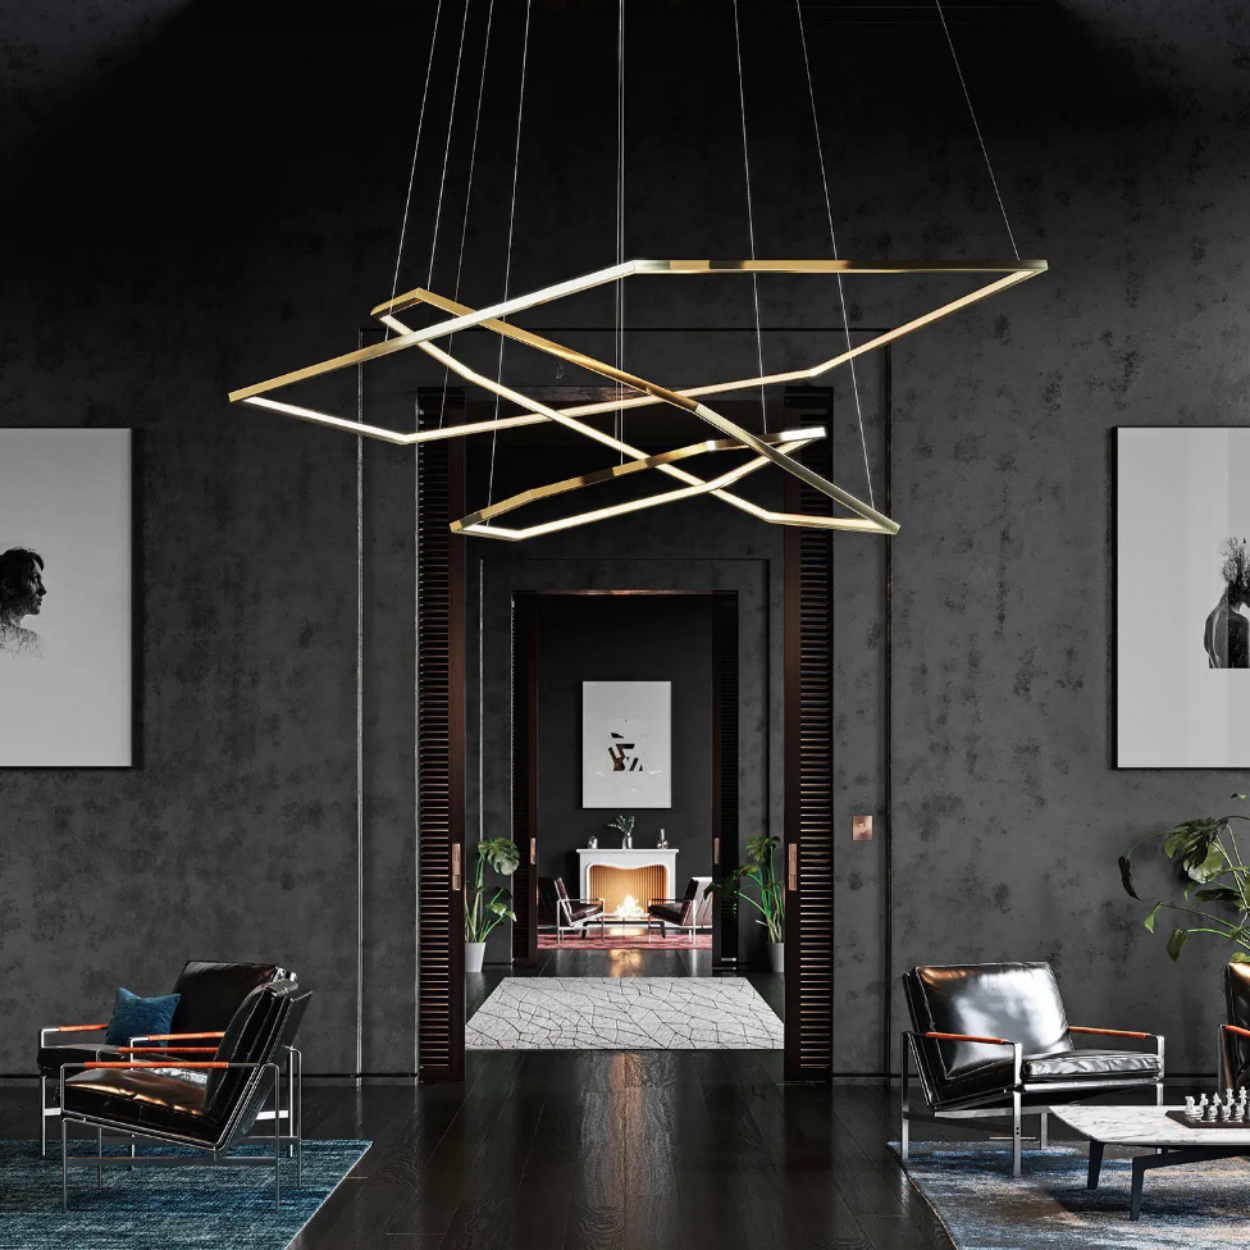 ANKUR GEOM HEXAGON 3 RING CONTEMPORARY LED CHANDELIER at the